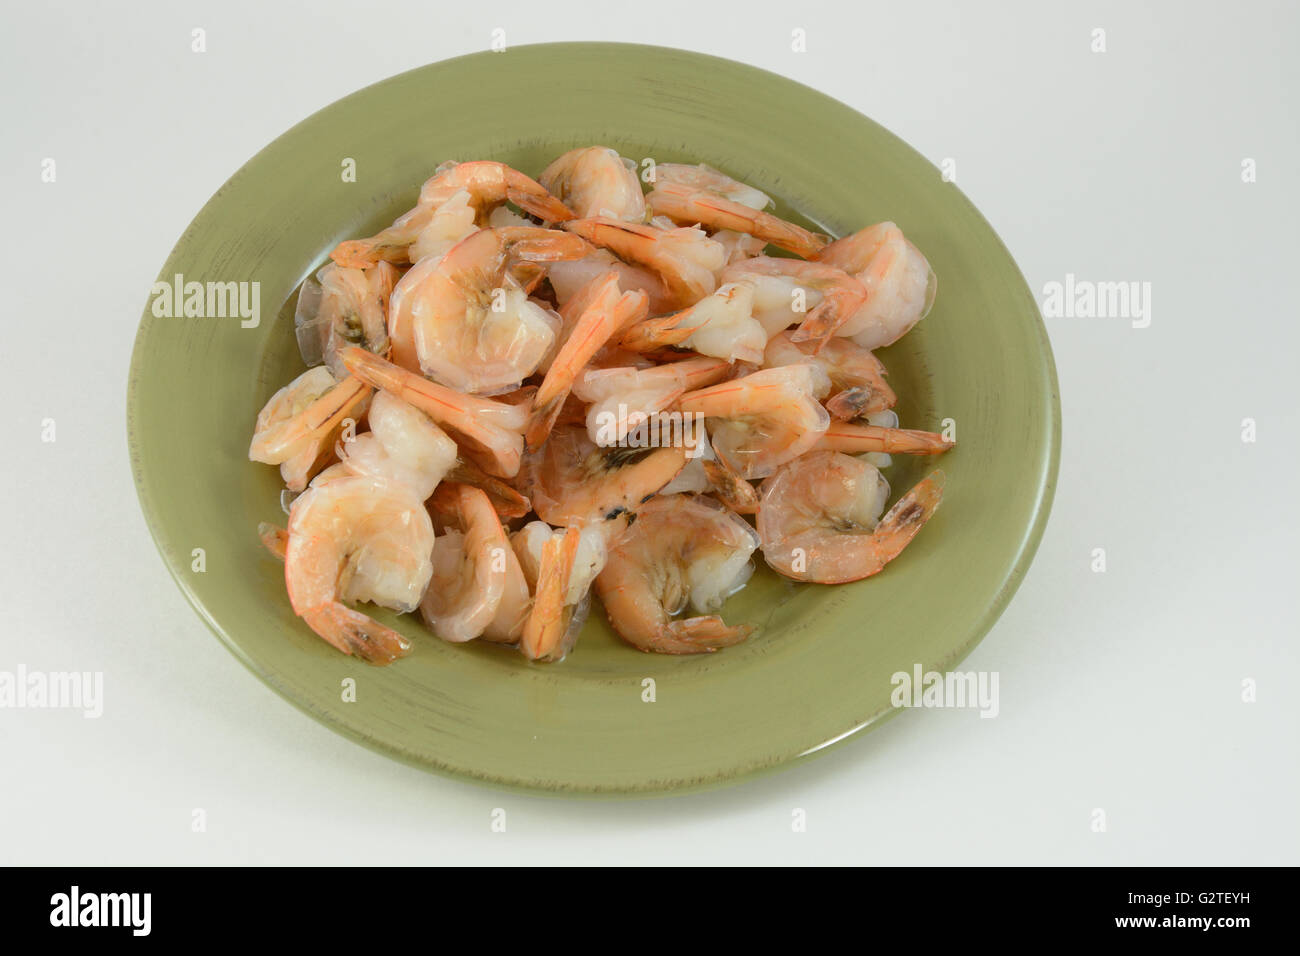 Cooked shrimp on plate Stock Photo